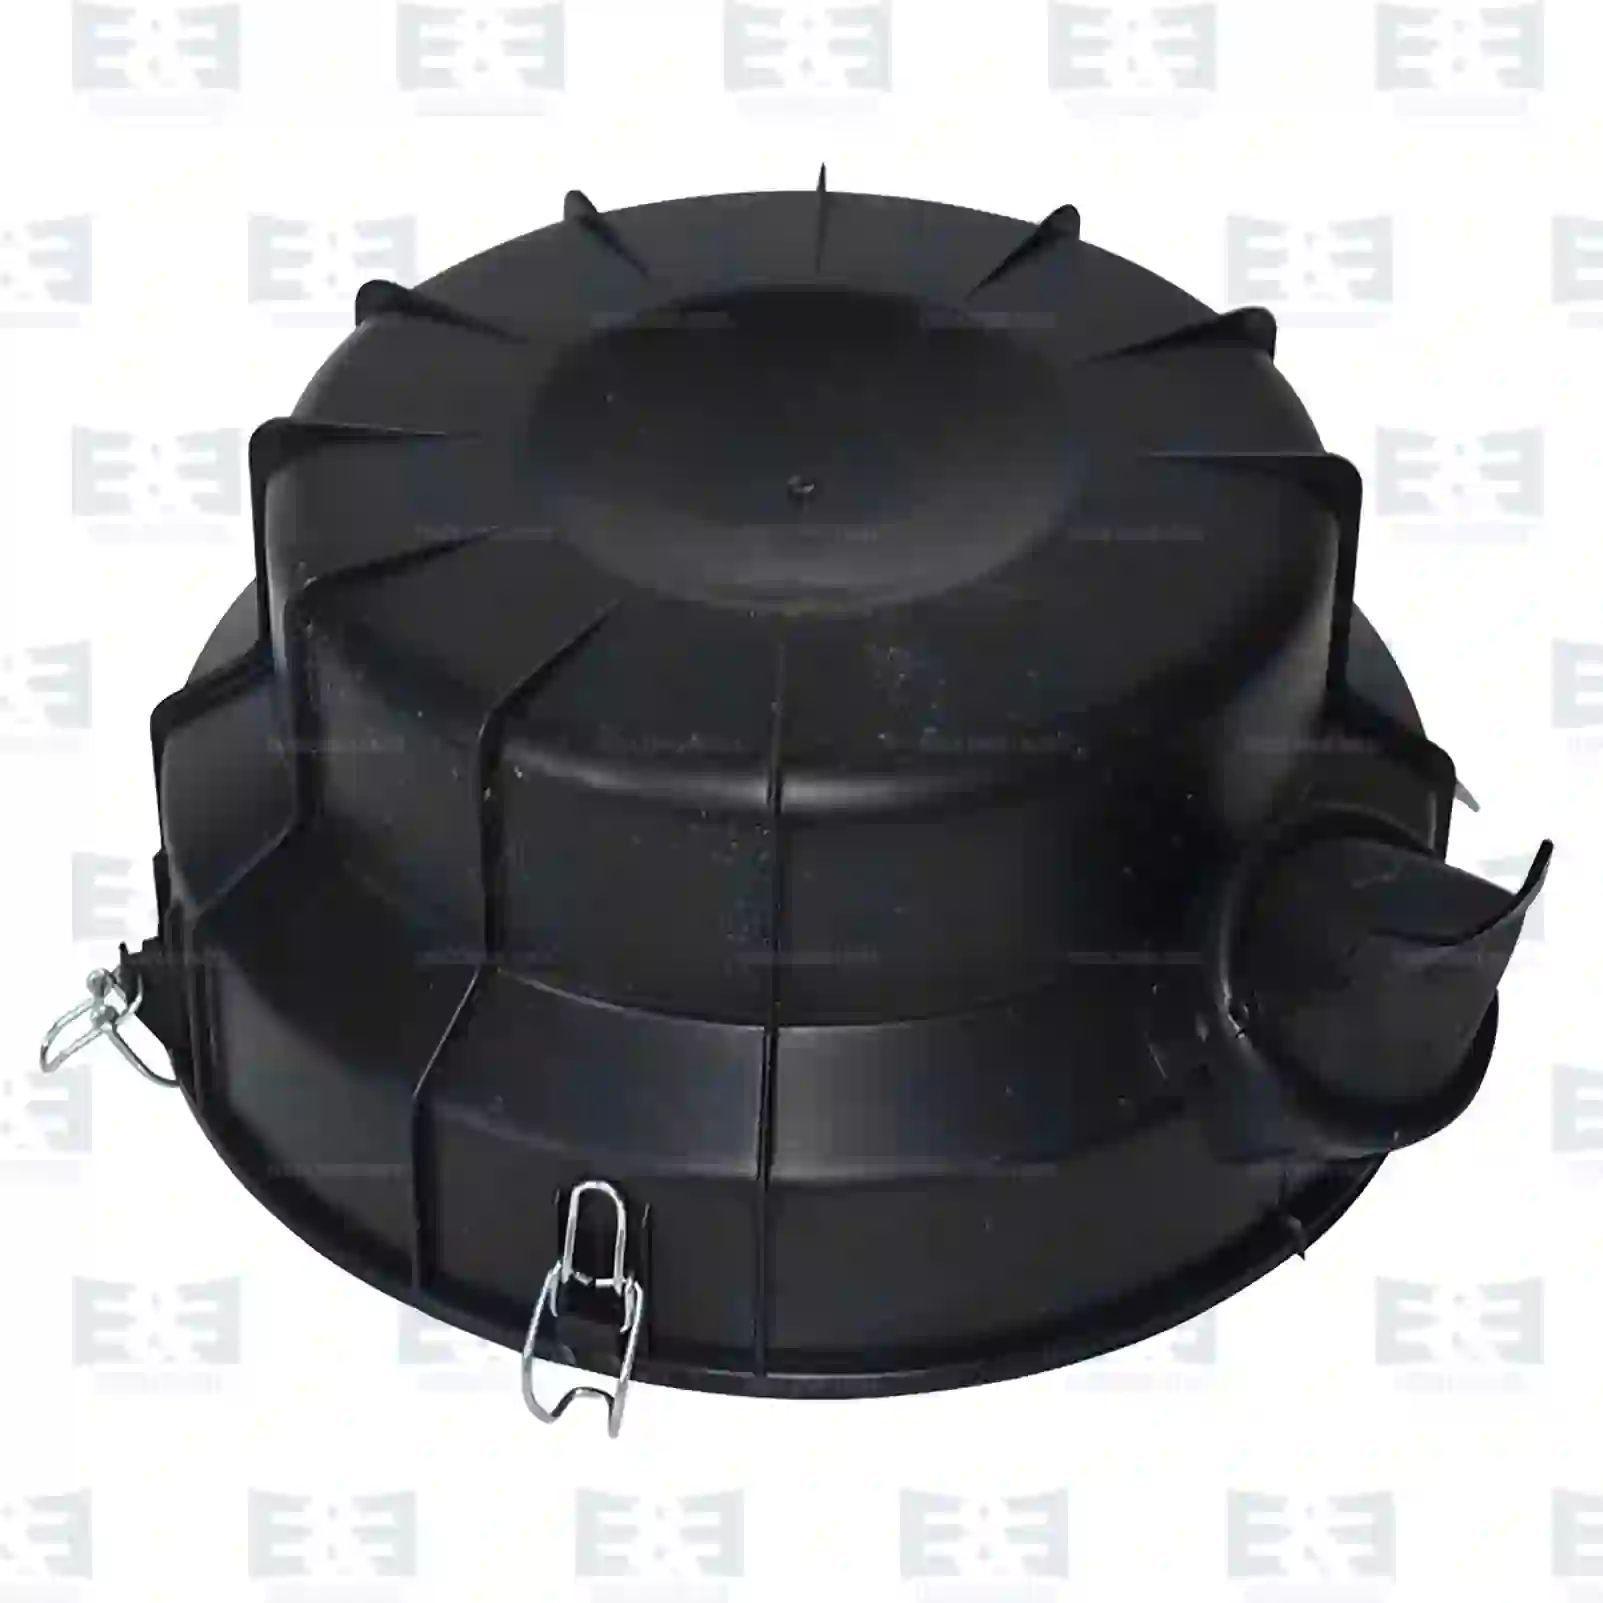  Air filter cover || E&E Truck Spare Parts | Truck Spare Parts, Auotomotive Spare Parts